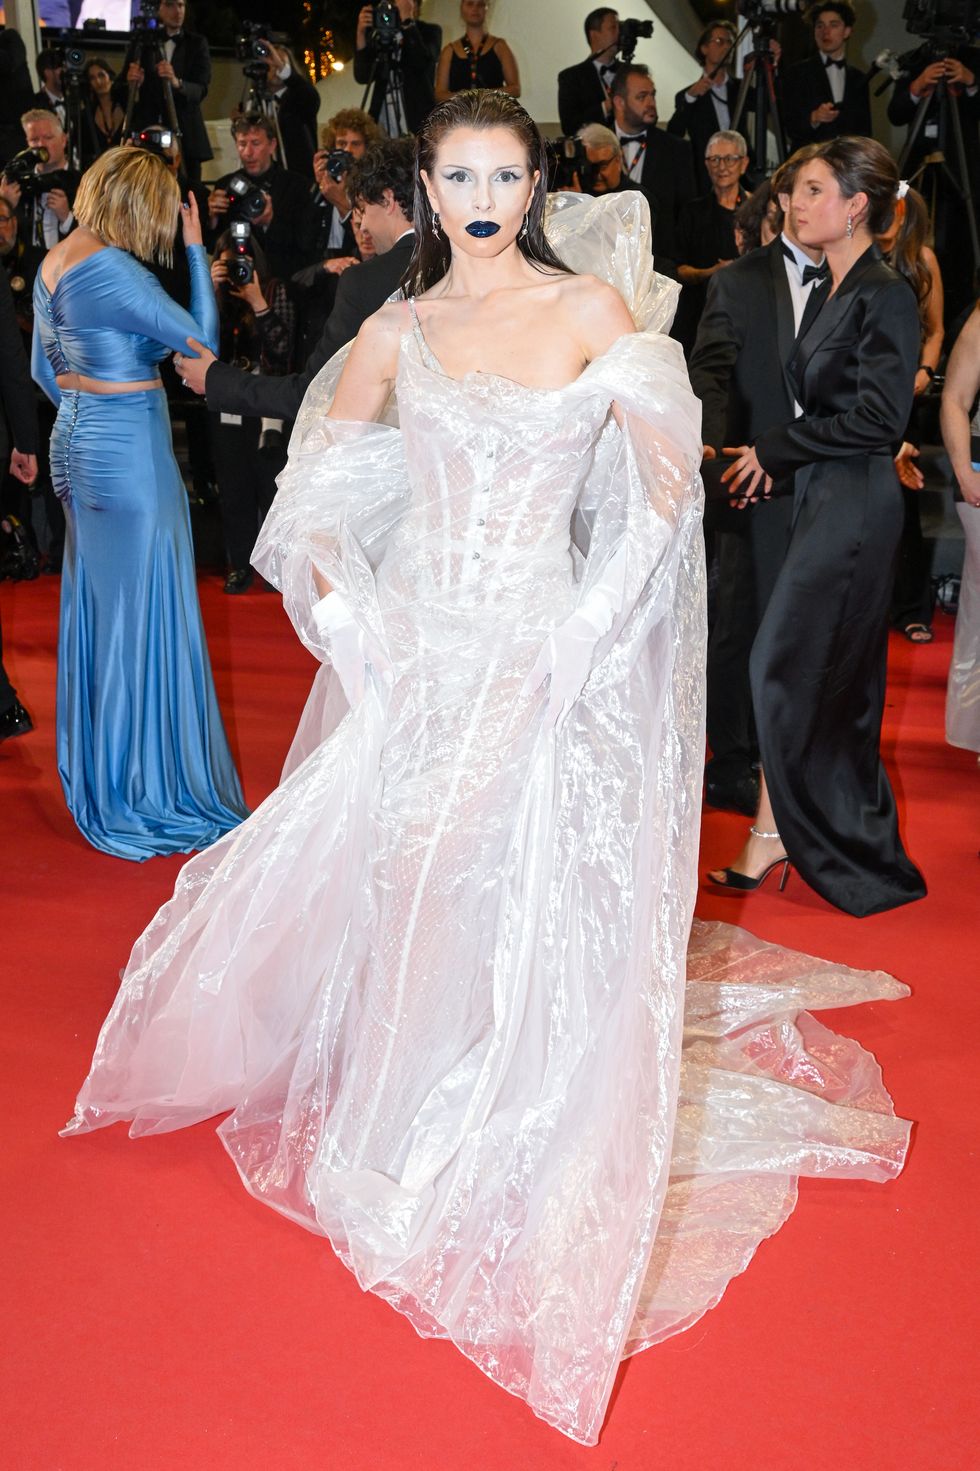 Julia Fox Wore Another See-Through Red-Carpet Look at Cannes